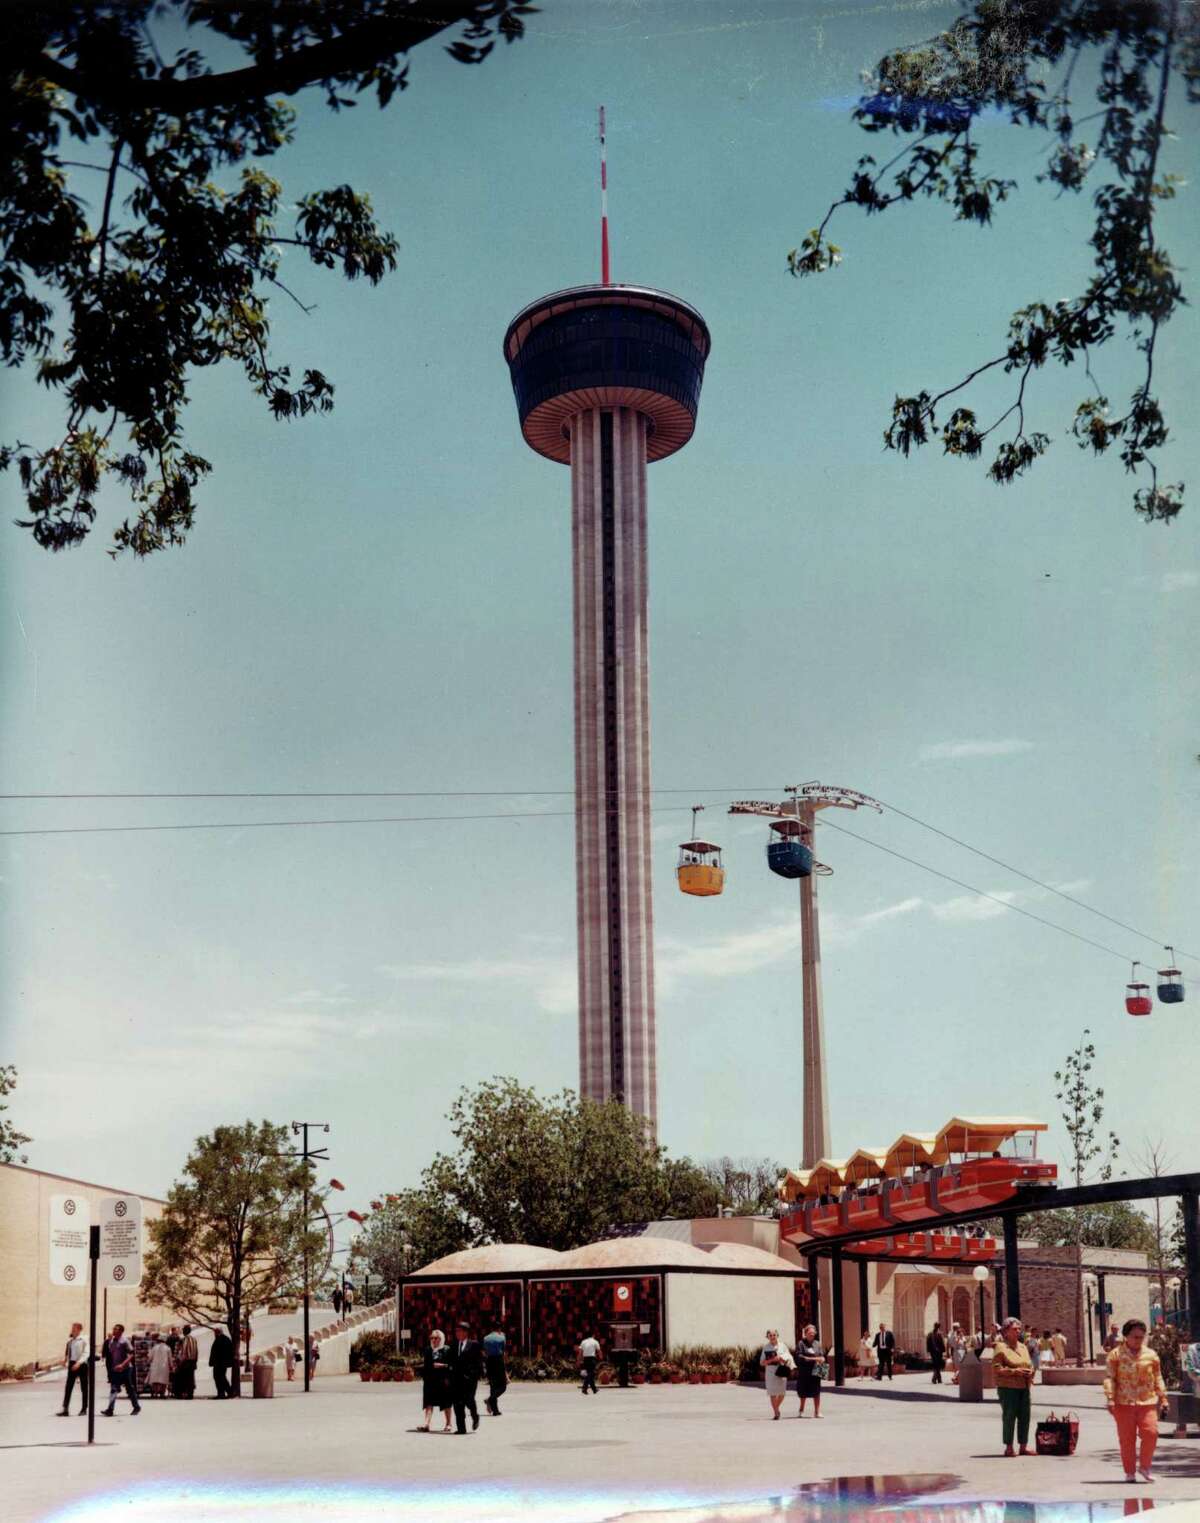 HemisFair, when it opened in 1968, featured a skyride that residents remember to this day. Imagine one along Broadway, from the airport to downtown.